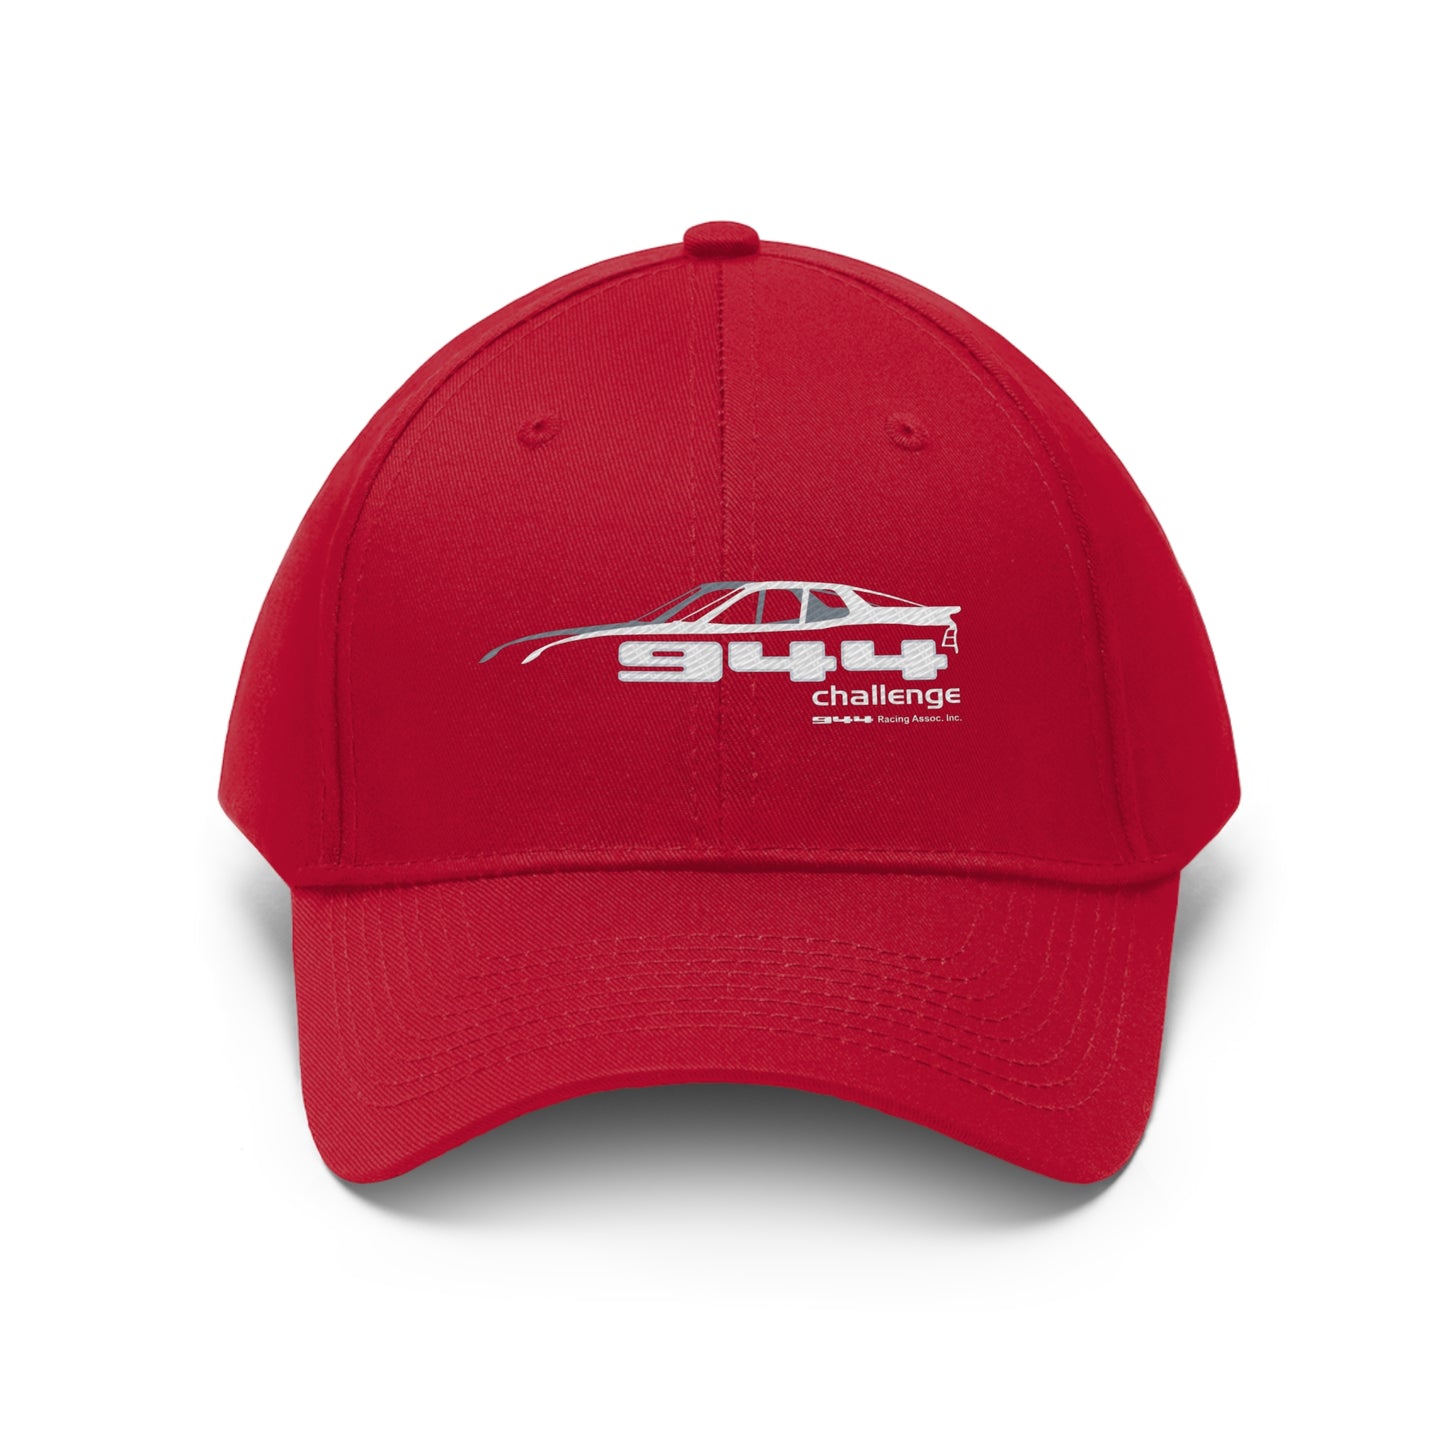 944 CHALLENGE Embroidered cap - red